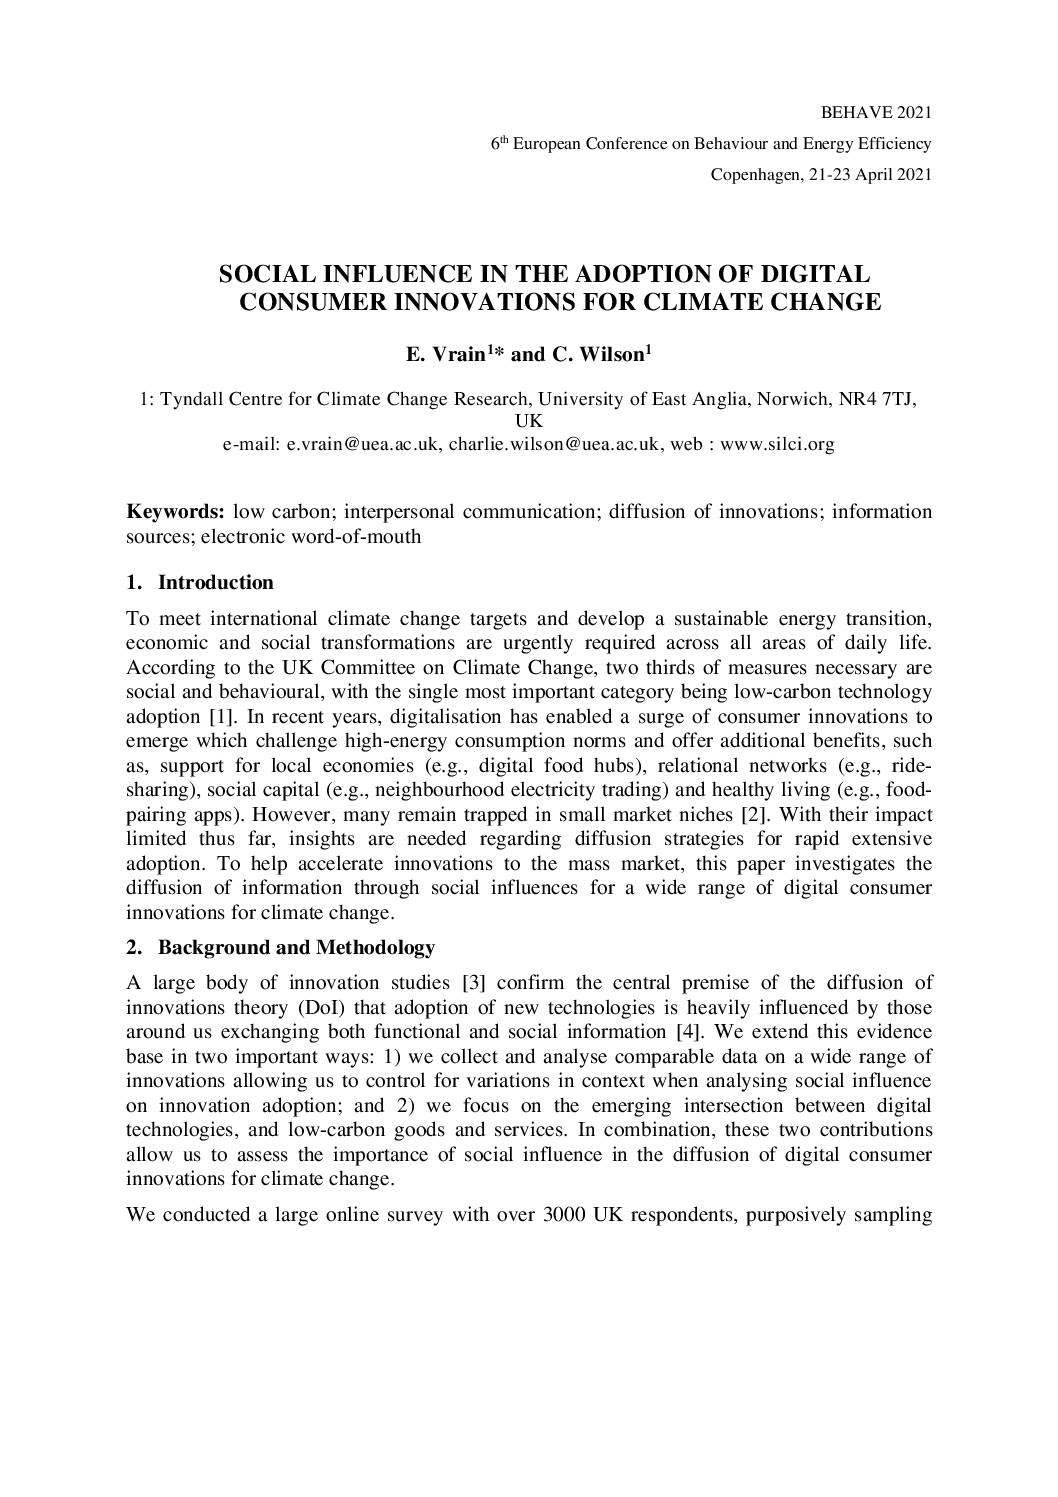 Social influence in the adoption of digital consumer innovations for climate change